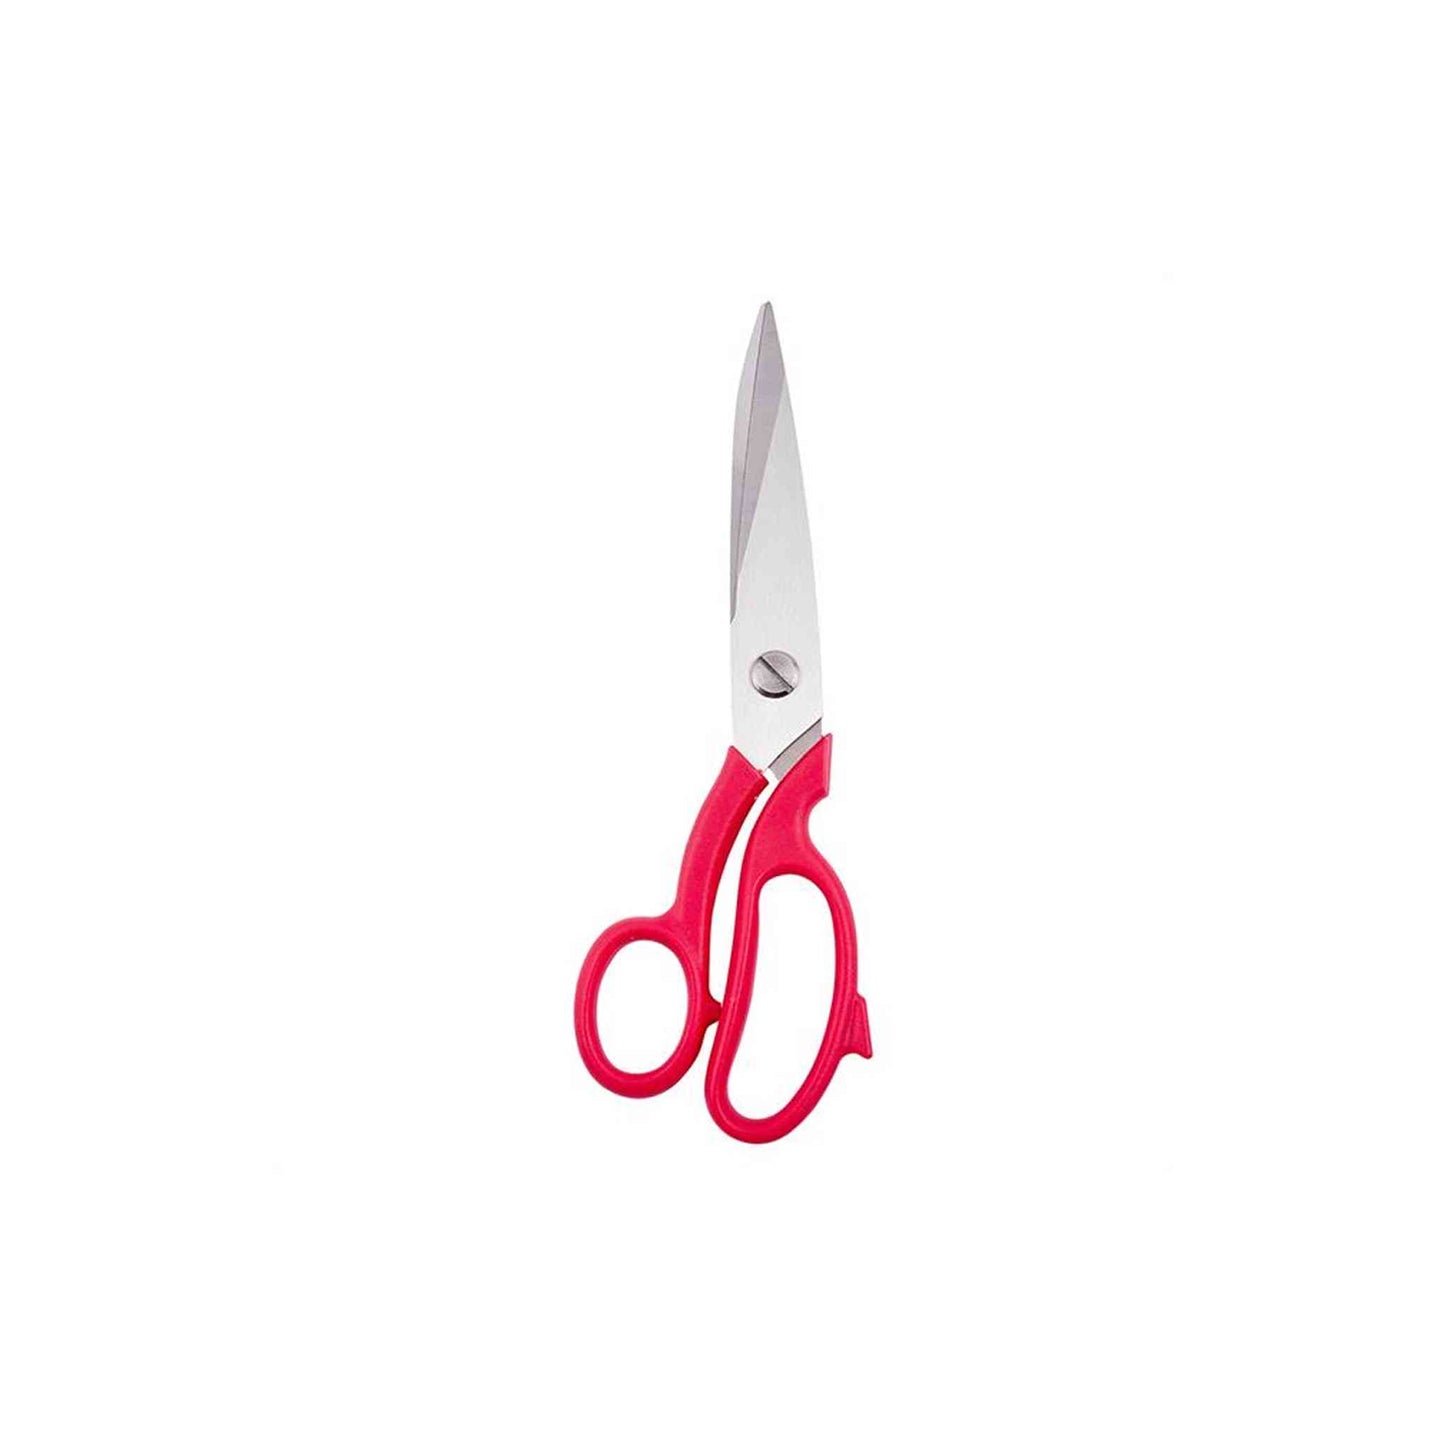 Klasse branded left-handed sewing scissors with a red handle and silver coloured blade, unpackaged